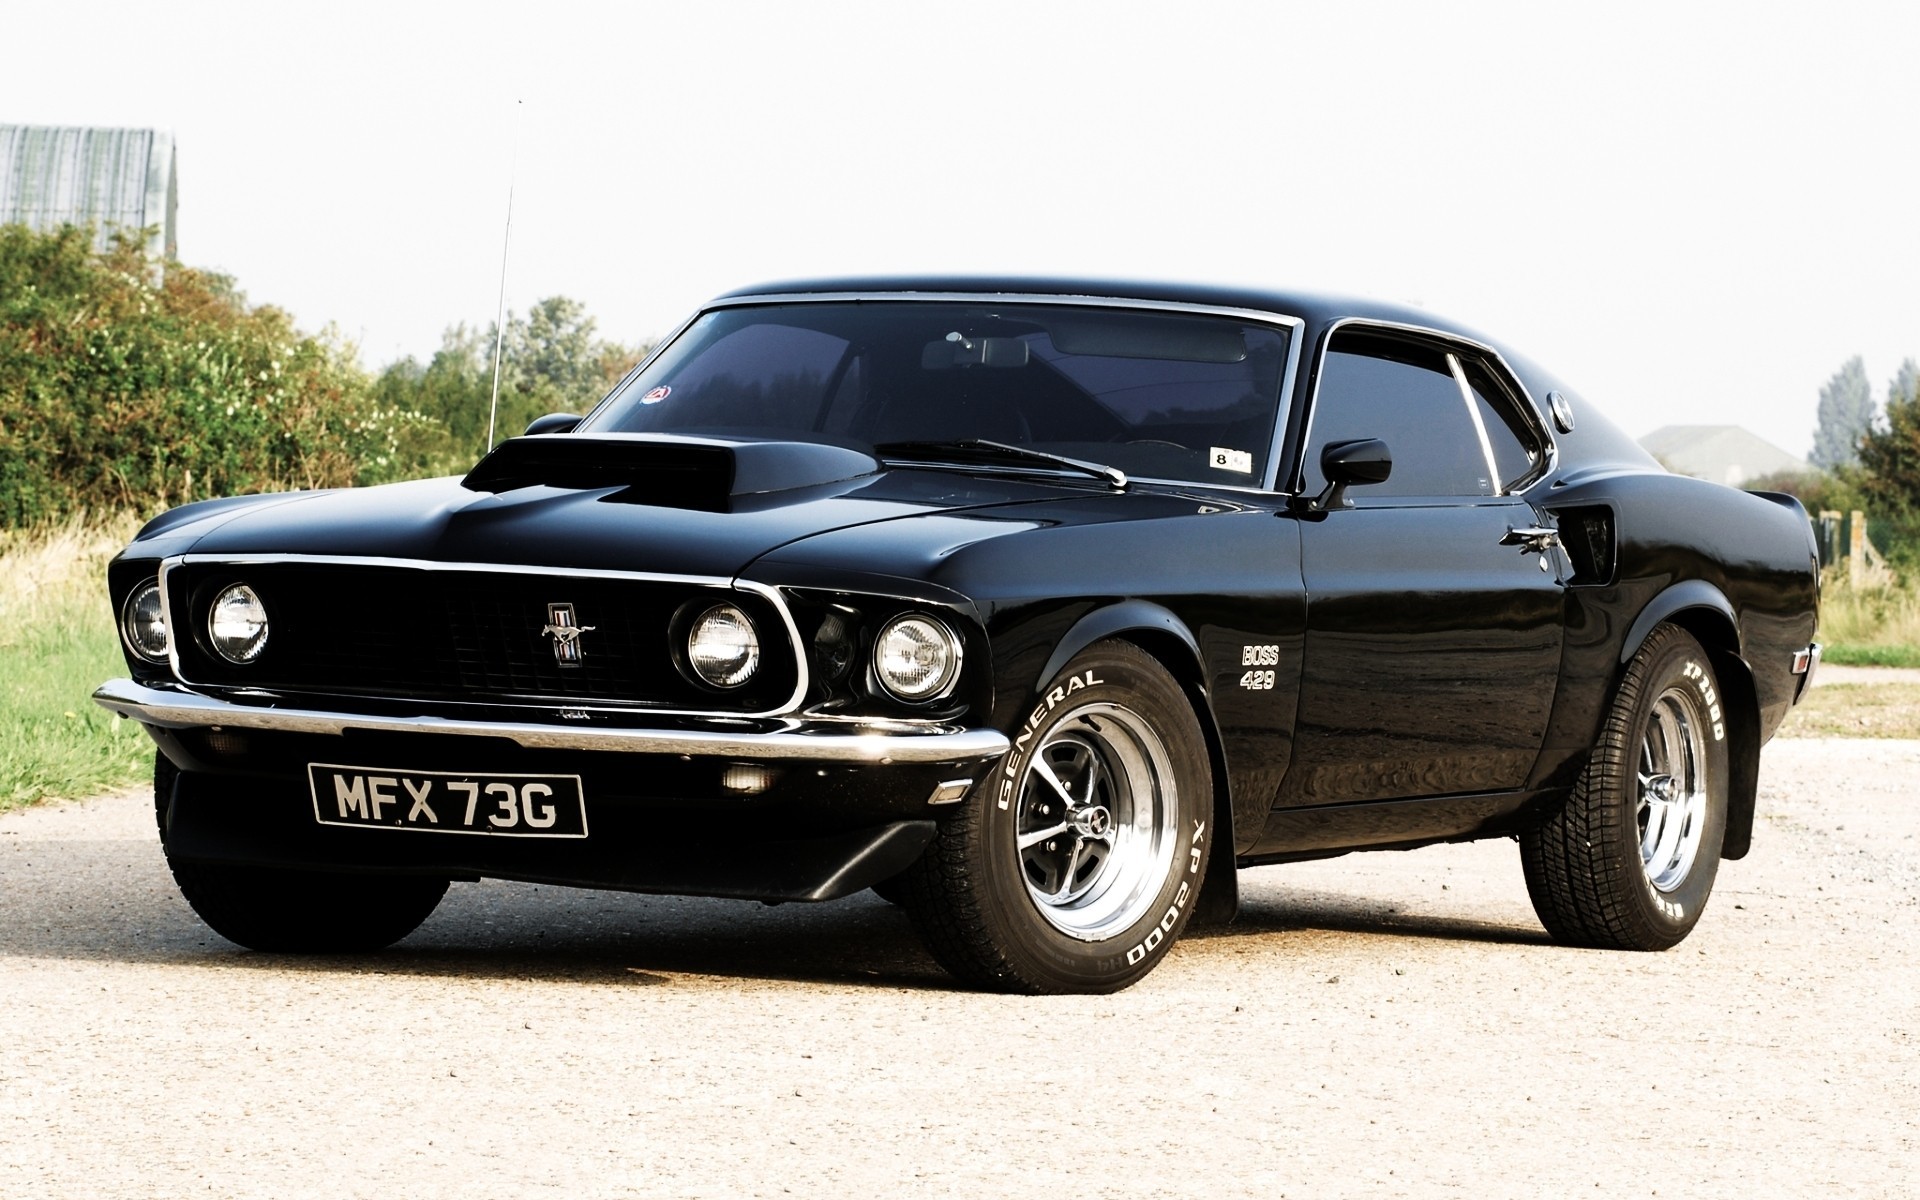 1920x1200 black classic mustang cars images | Desktop Exchange Â» Car pictures Â» Ford  Mustang wallpapers